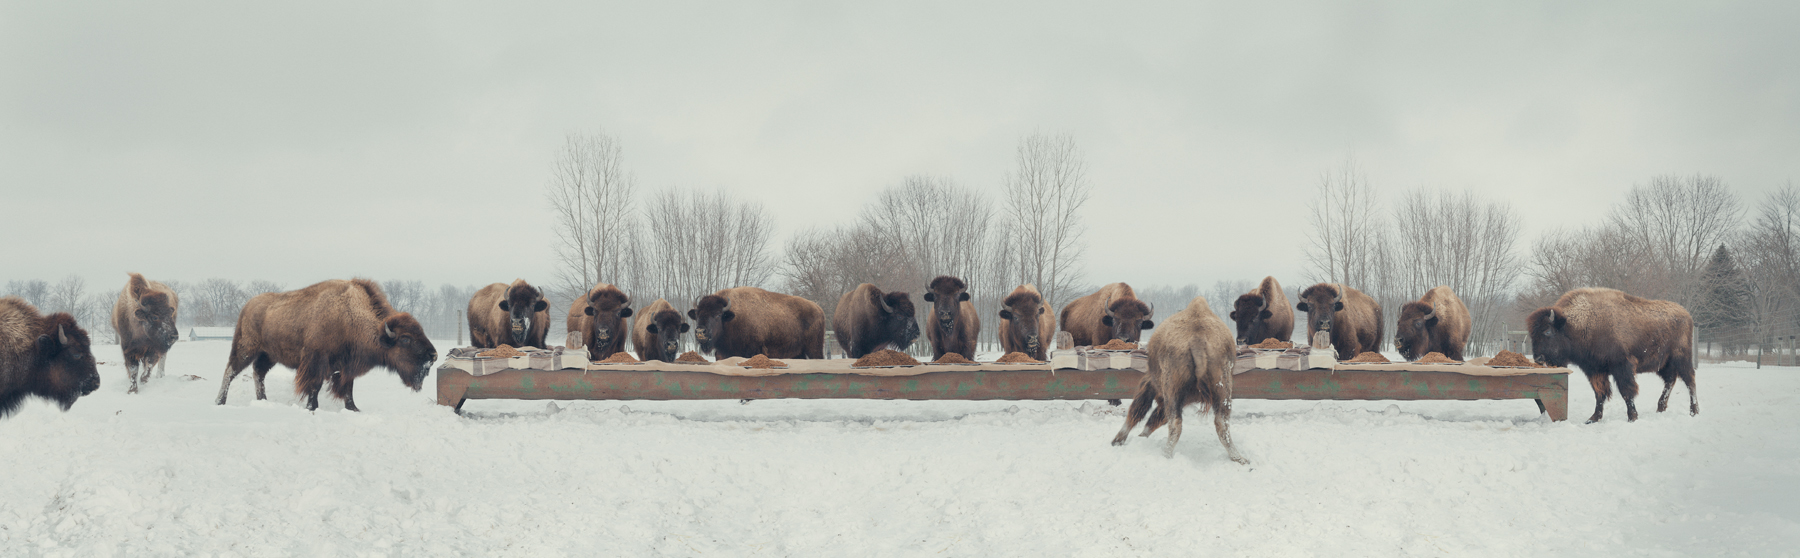  The Bison Feast  United States, 2014  10”x32” | 20”x64.5” | 40”x129” 